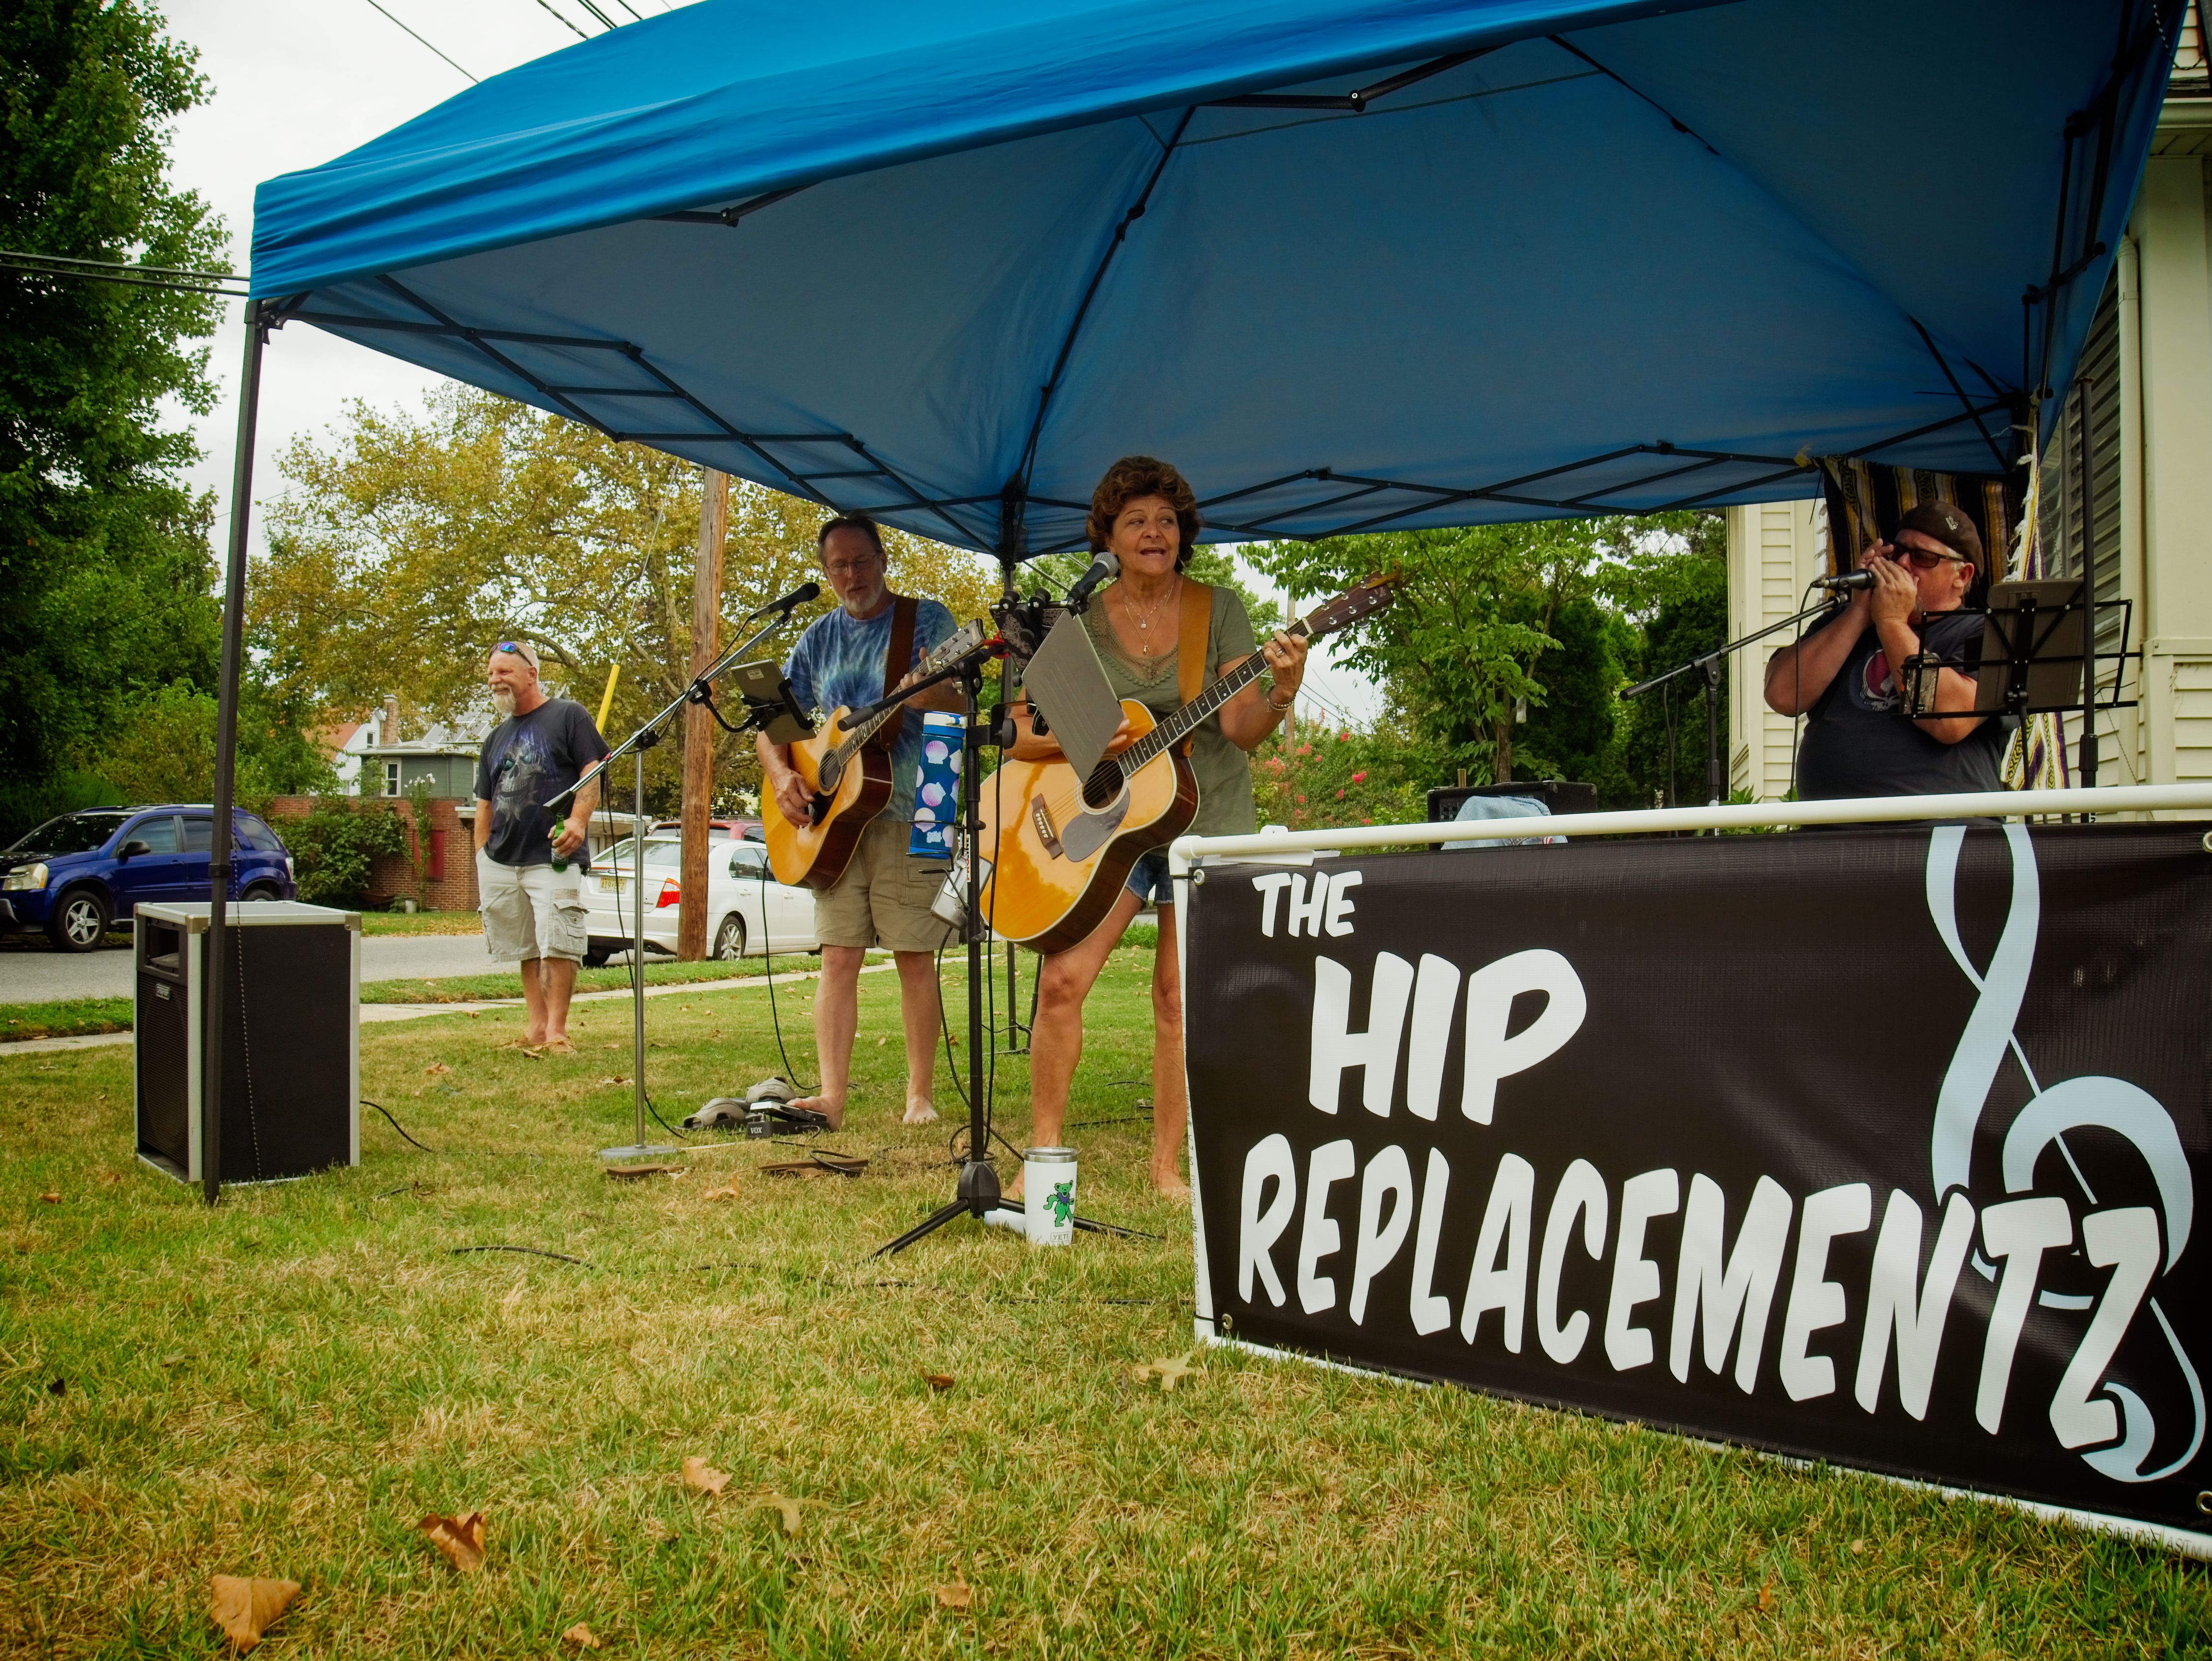 The Hip Replacements perform a set.